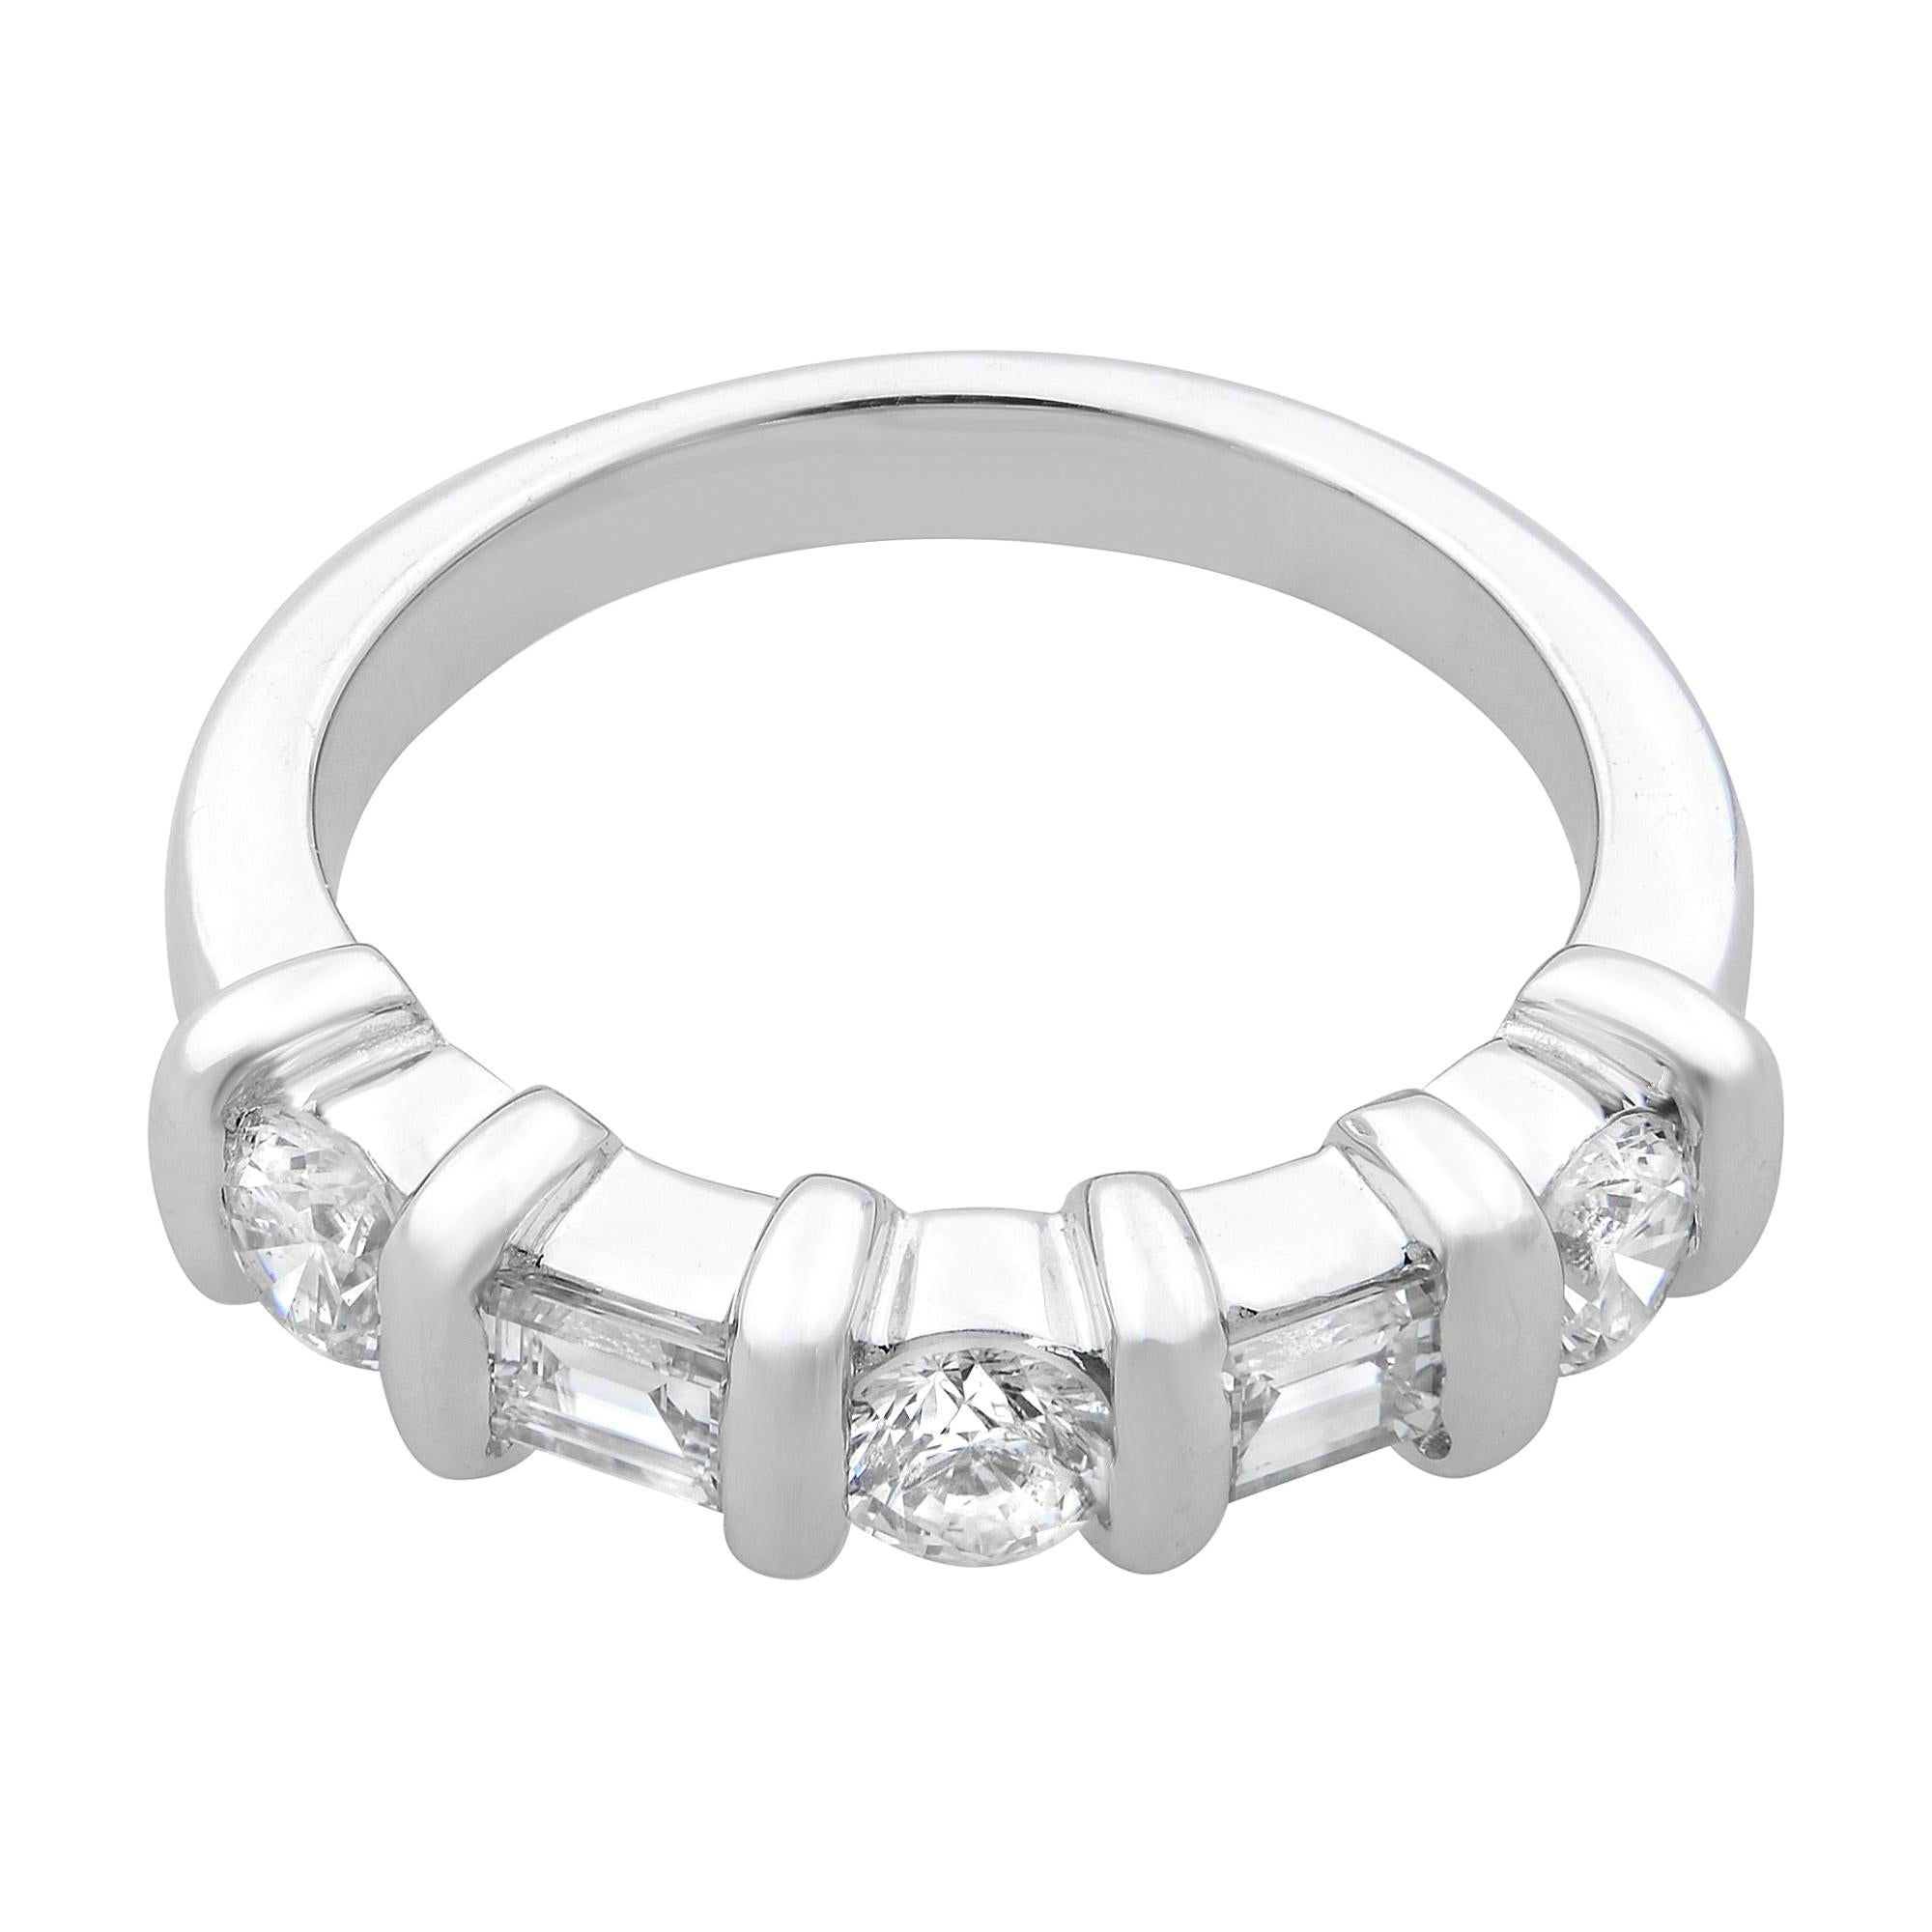 This beautiful diamond wedding band features 3 brilliant round cut and 2 baguette cut diamonds weighing 0.66ct, coupled with smooth, lustrous vertical rounded channels. Diamond color G and SI1 clarity. This band is crafted in 14k white gold. The